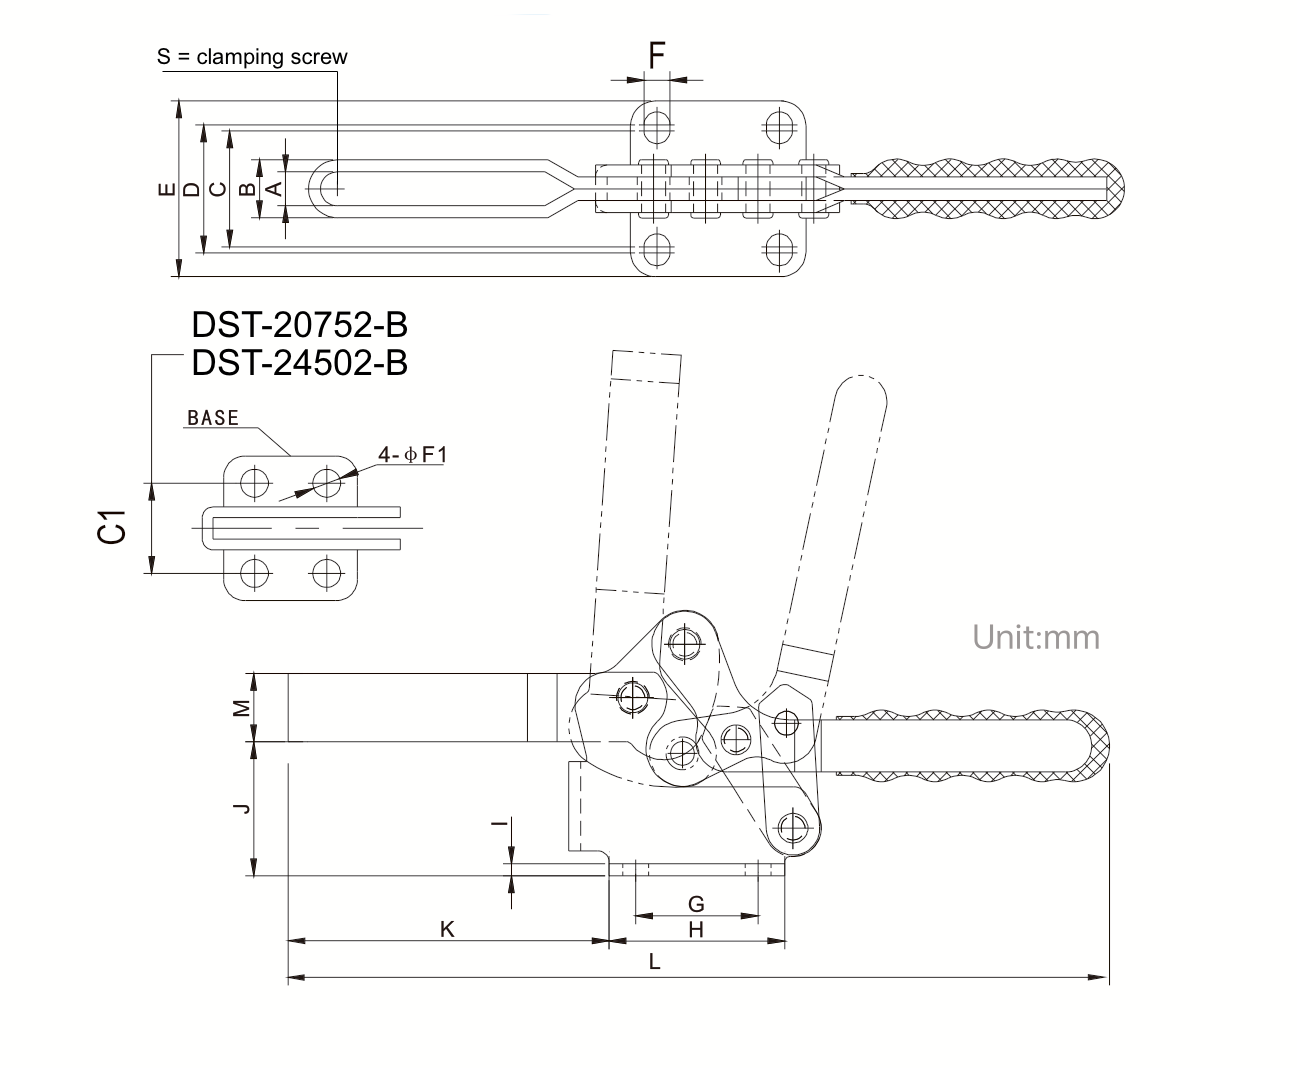 DST-20752-B Technical Drawing Overview